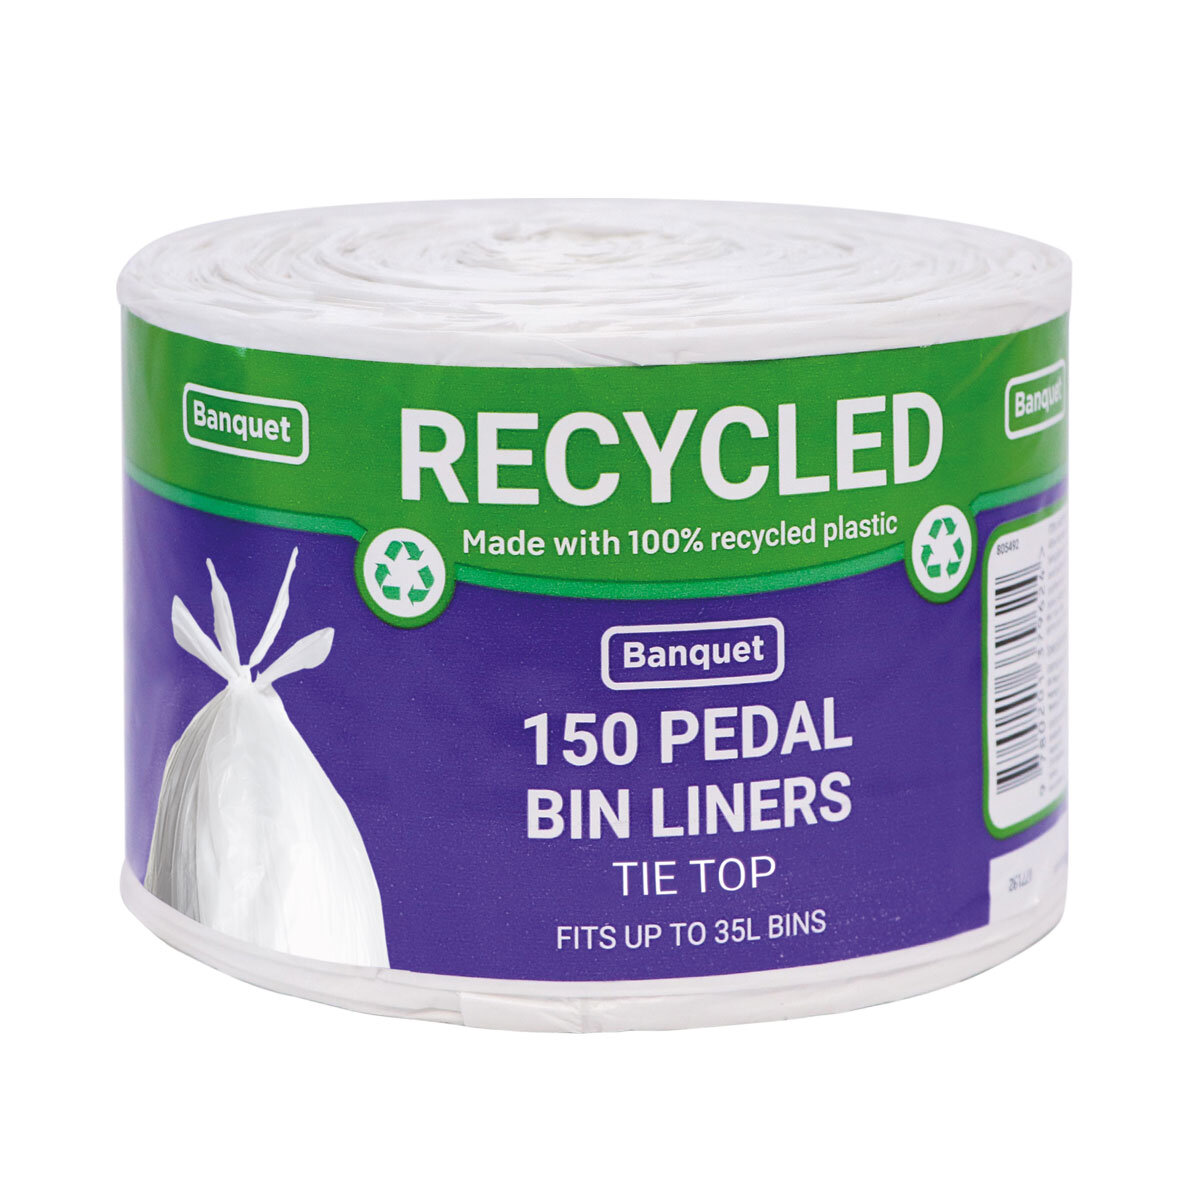 Banquet Recycled Tie Top Pedal Bin Liners, 150 Pack